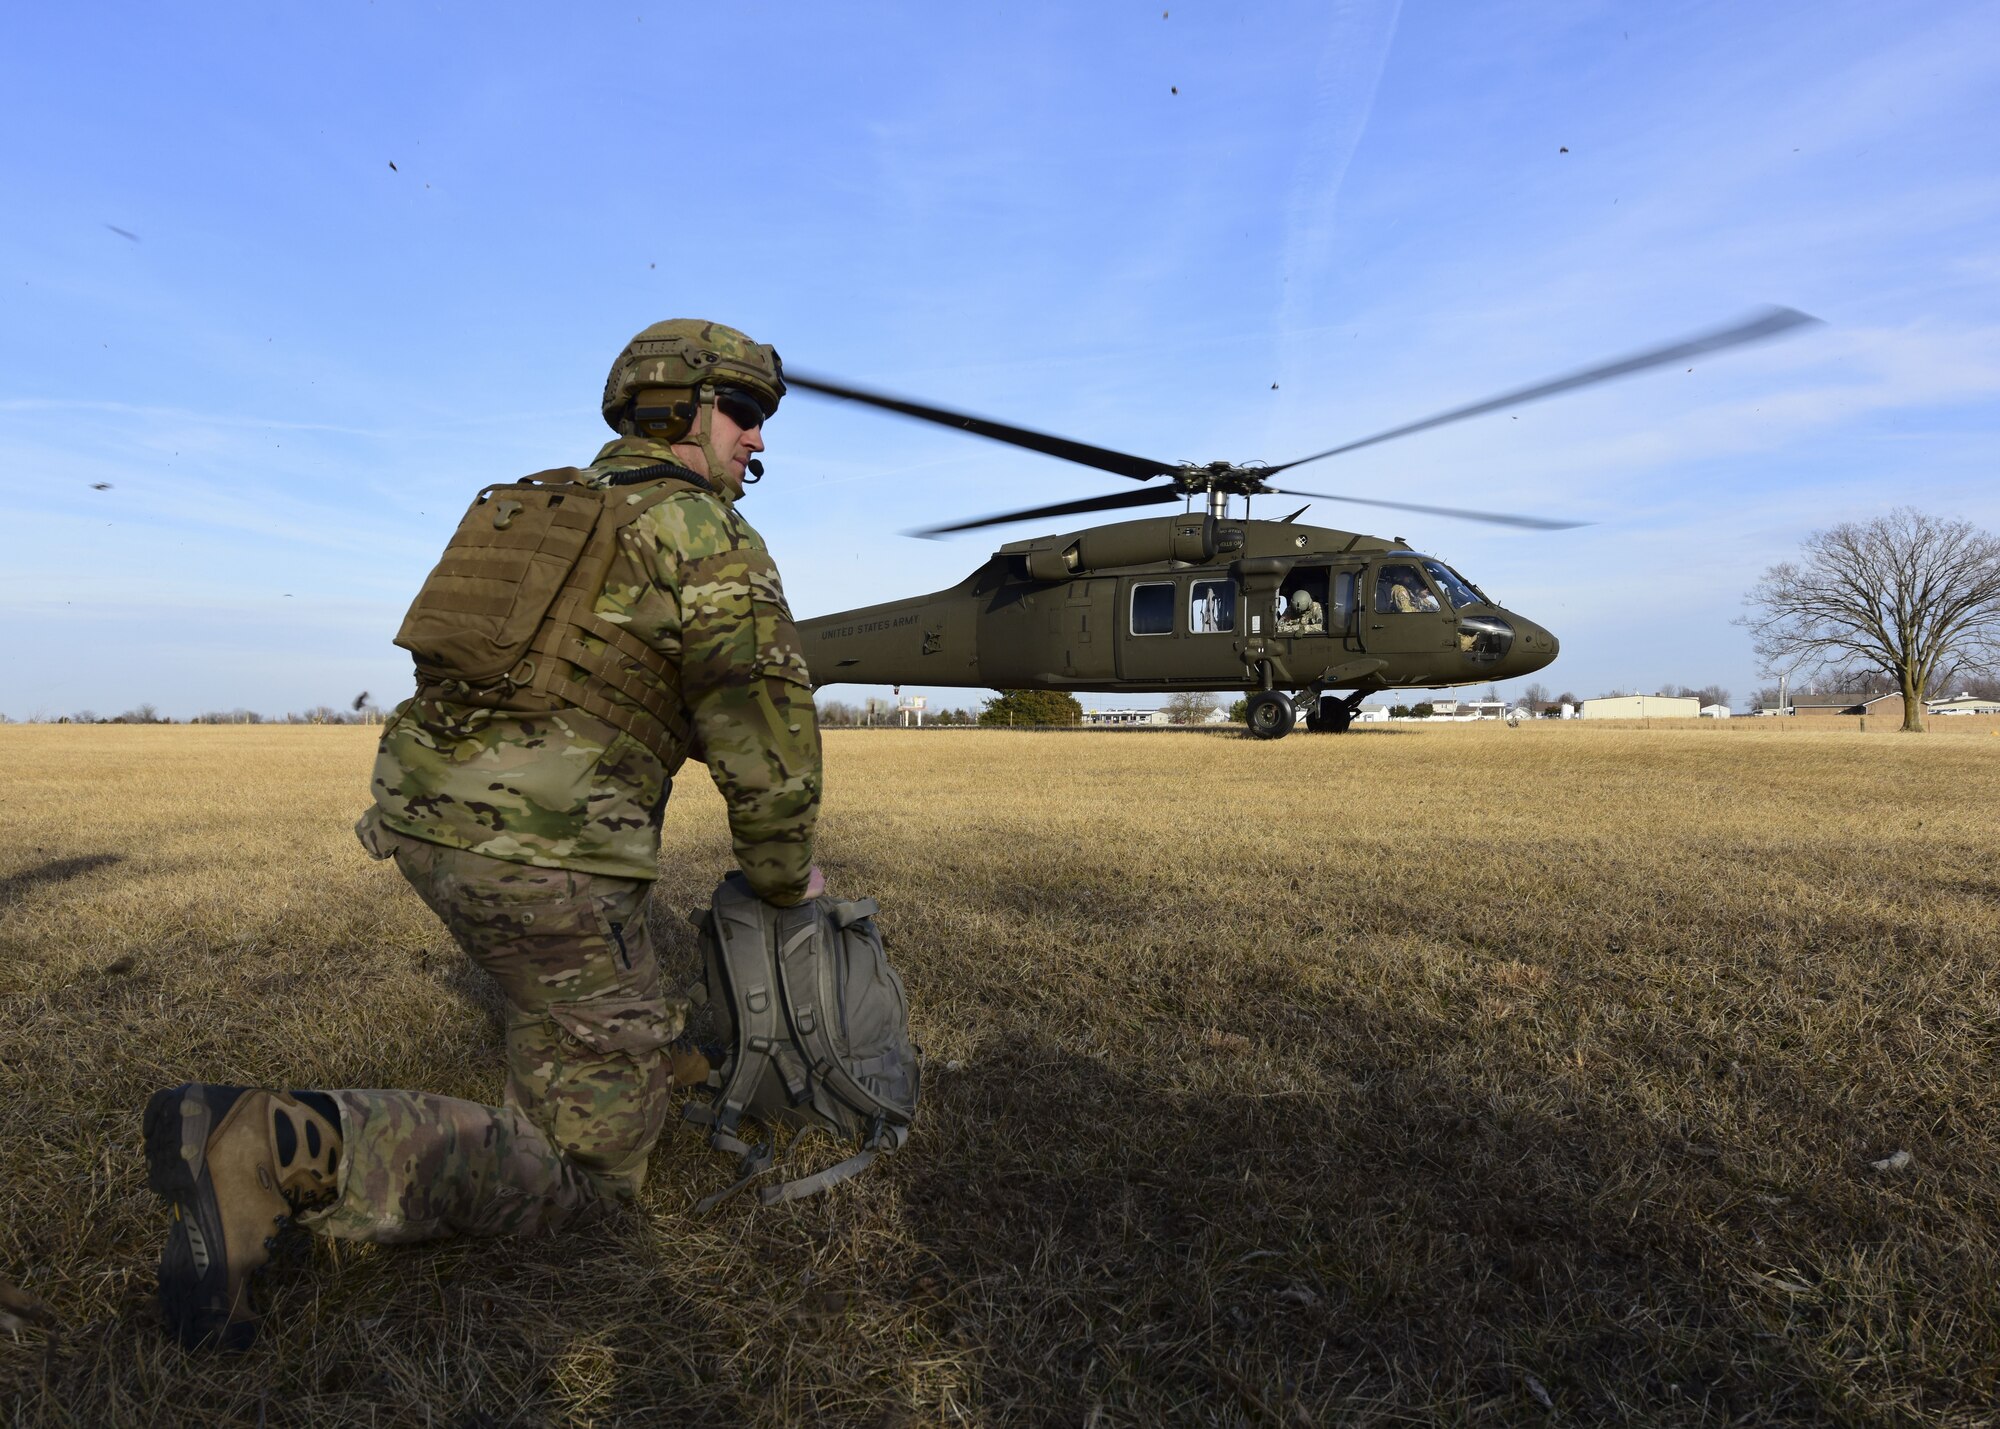 A Joint Terminal Attack Controller assigned to the 7th Air Support Operations Squadron, located in Fort Bliss, Texas,  waits for a UH-0 Black Hawk land during a joint training at Warshaw, Mo., Jan. 31, 2018. JTACs are personnel who are authorized to call airstrikes and help coordinate close-air-support missions. (U.S. Air Force by Staff Sgt. Danielle Quilla)